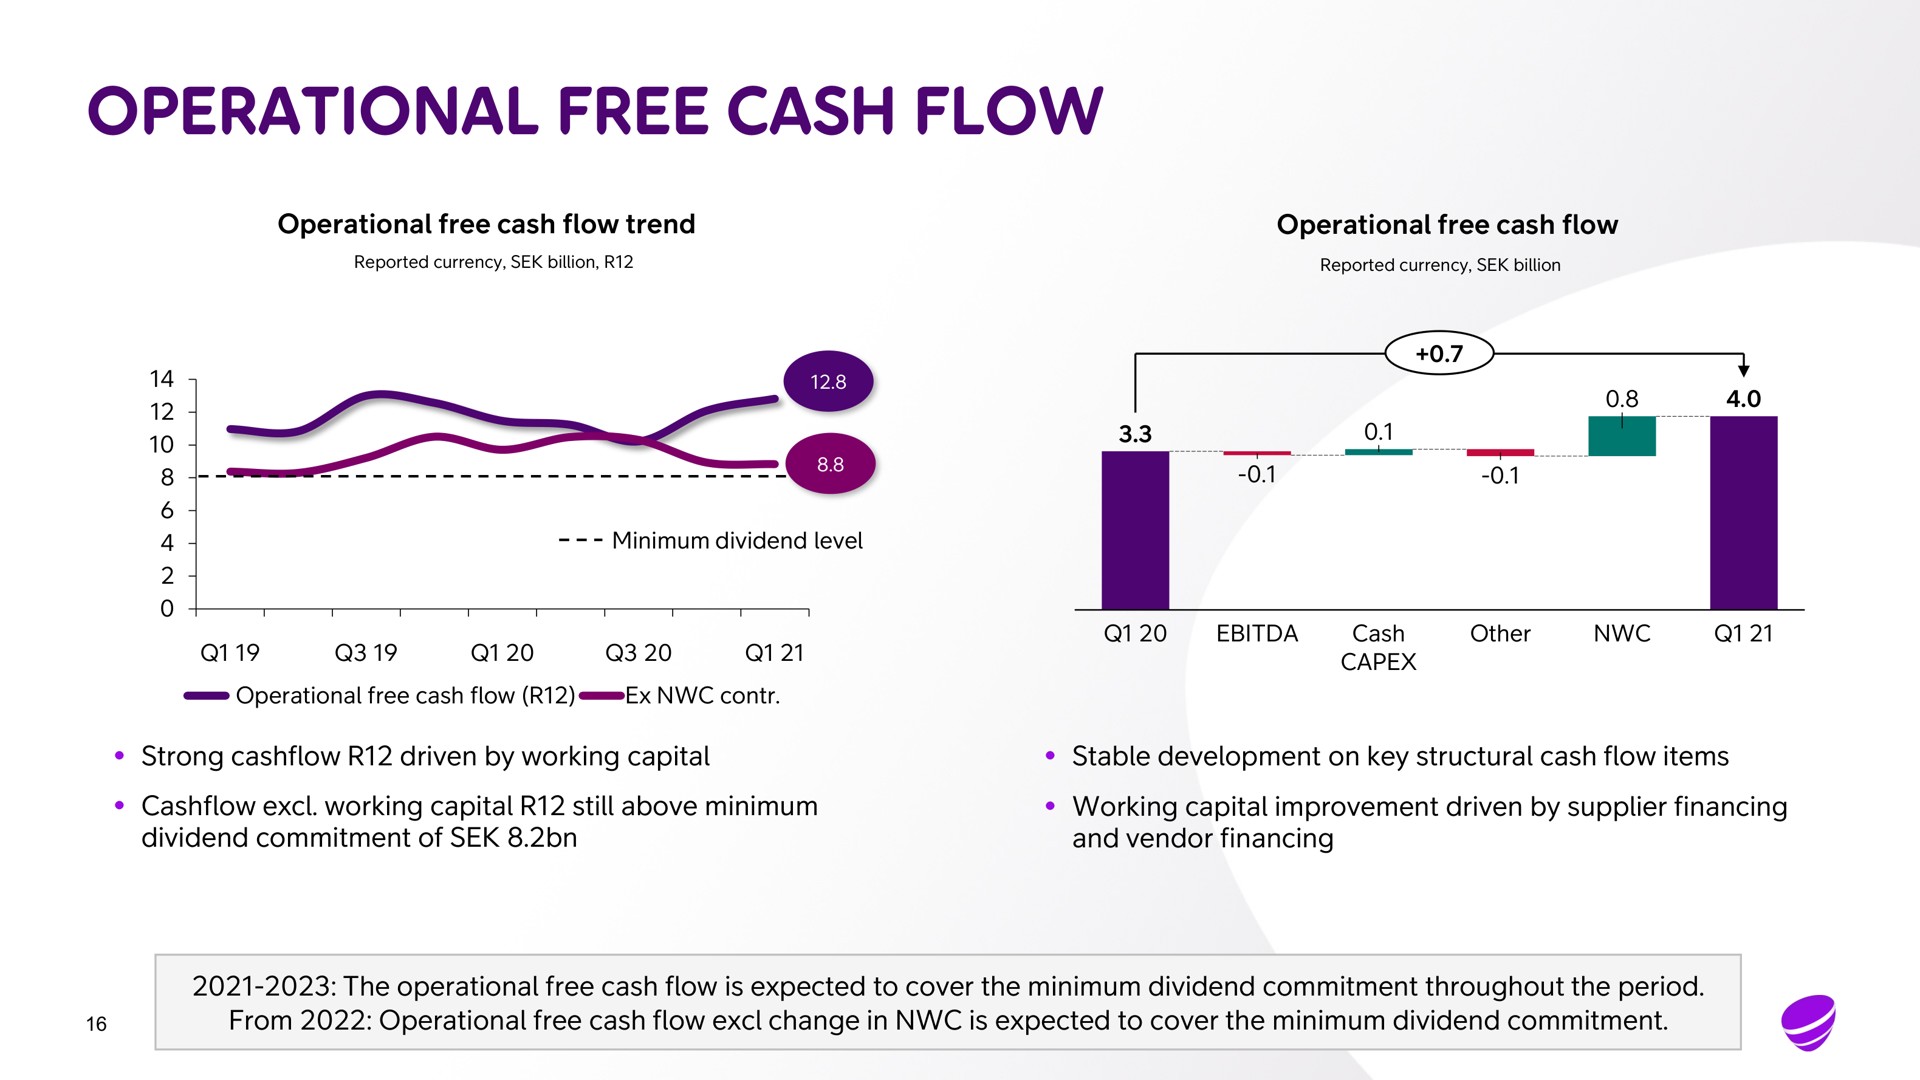 operational free cash flow operational free cash flow trend operational free cash flow strong driven by working capital stable development on key structural cash flow items working capital still above minimum working capital improvement driven by supplier financing dividend commitment of and vendor financing the operational free cash flow is expected to cover the minimum dividend commitment throughout the period from operational free cash flow change in is expected to cover the minimum dividend commitment other | Telia Company